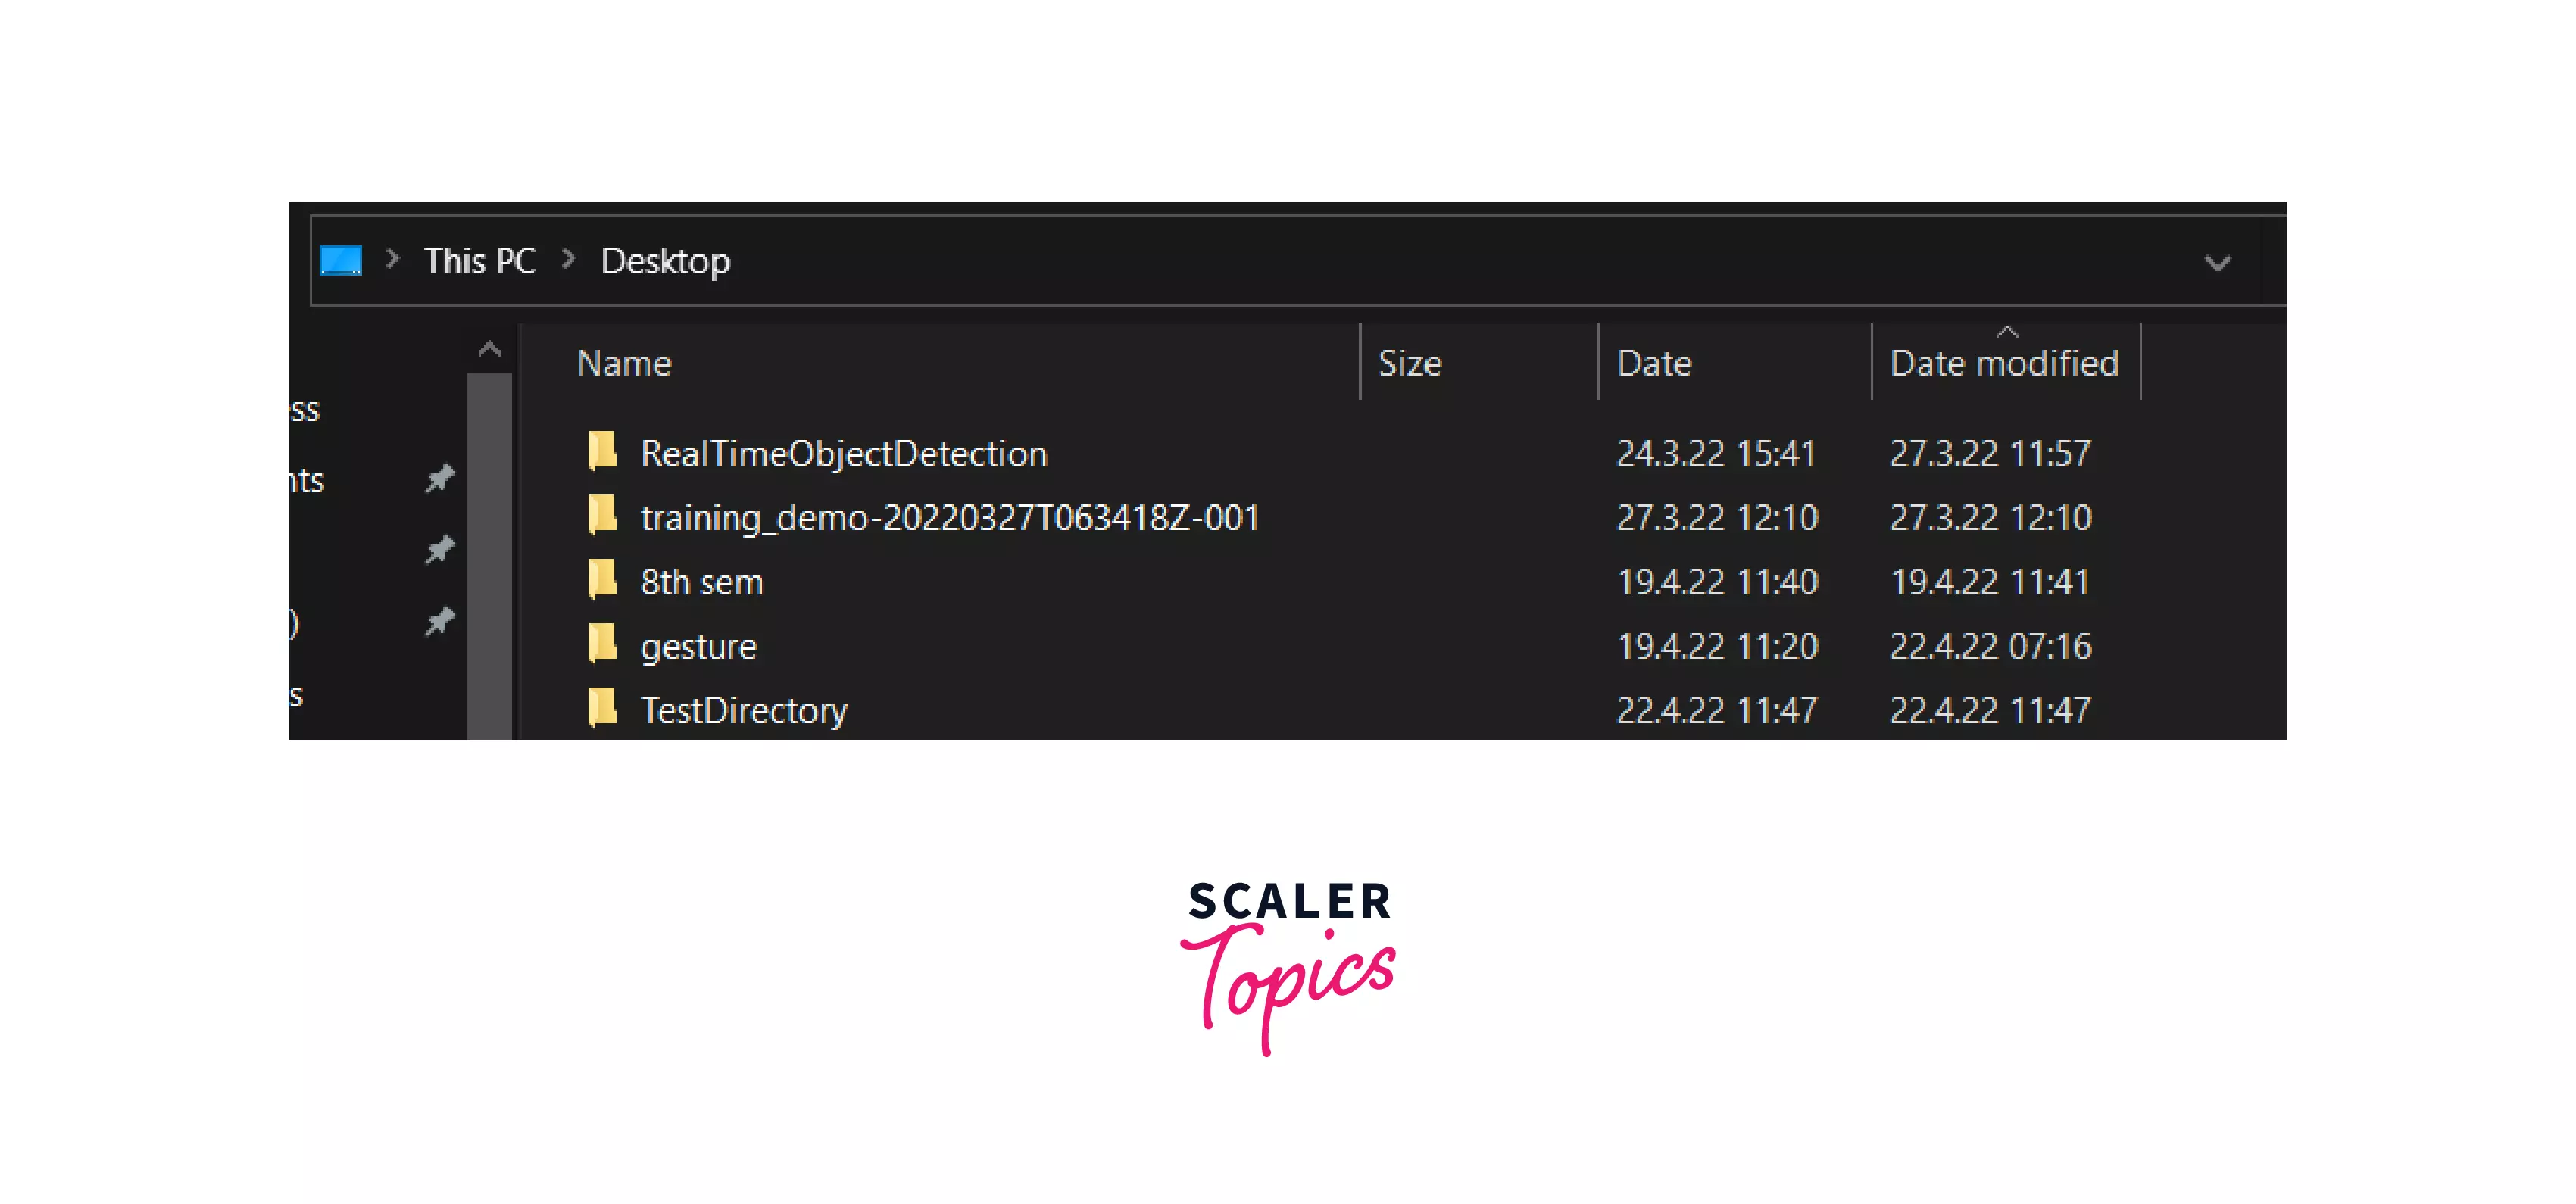 Create Directory In Python - Scaler Topics